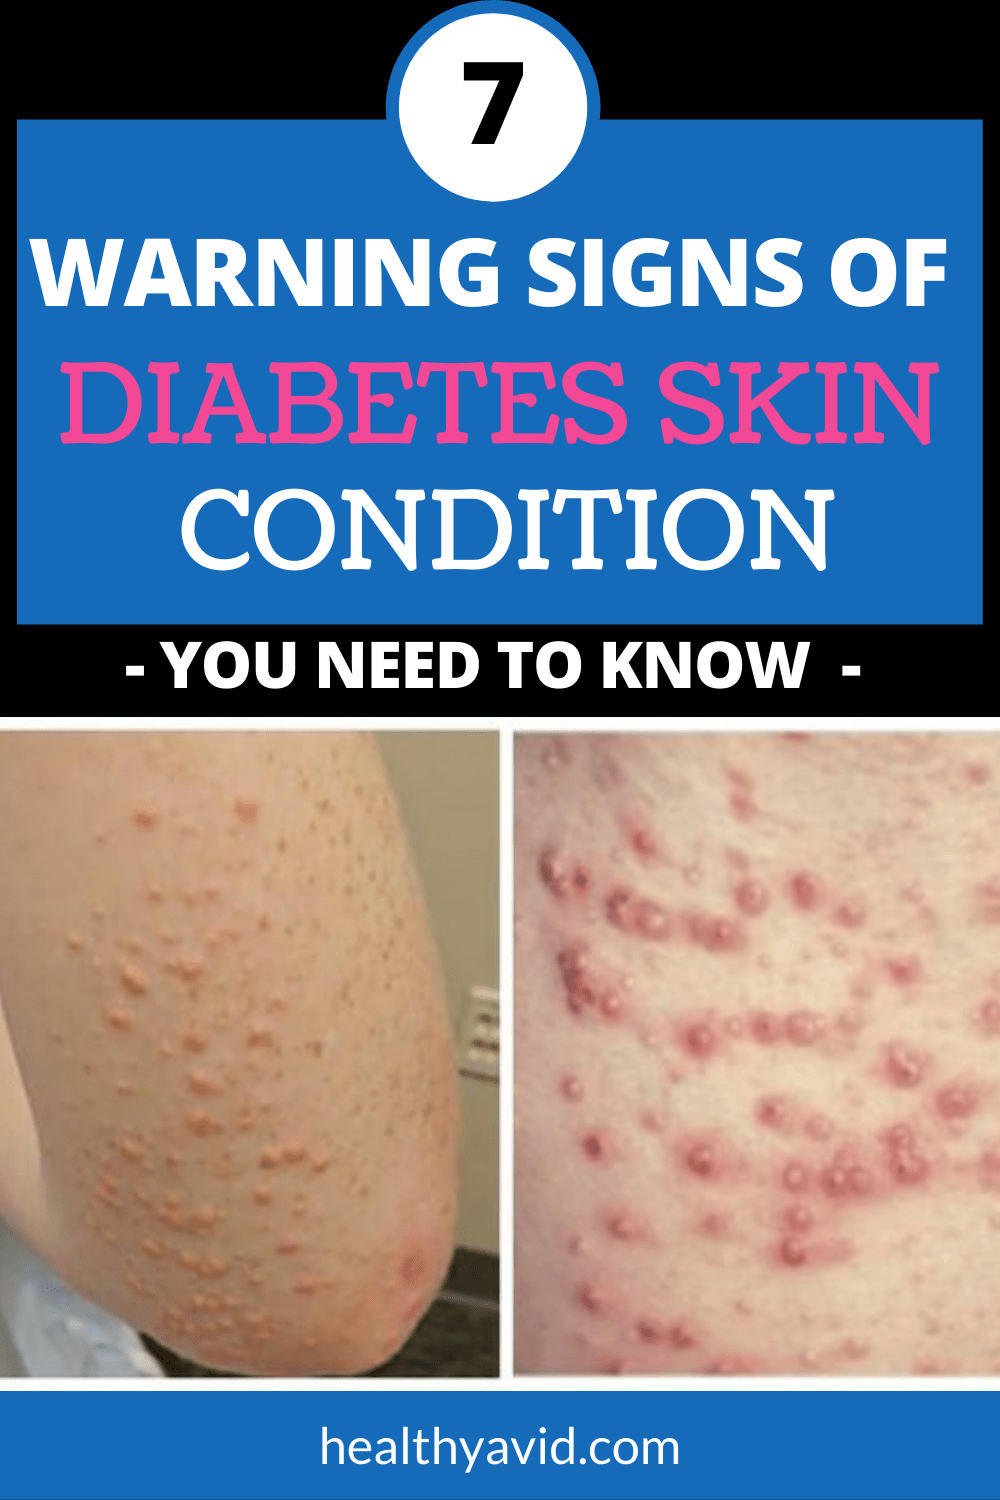 7 Diabetes Skin Problems And Warning Signs You Should Know 5215